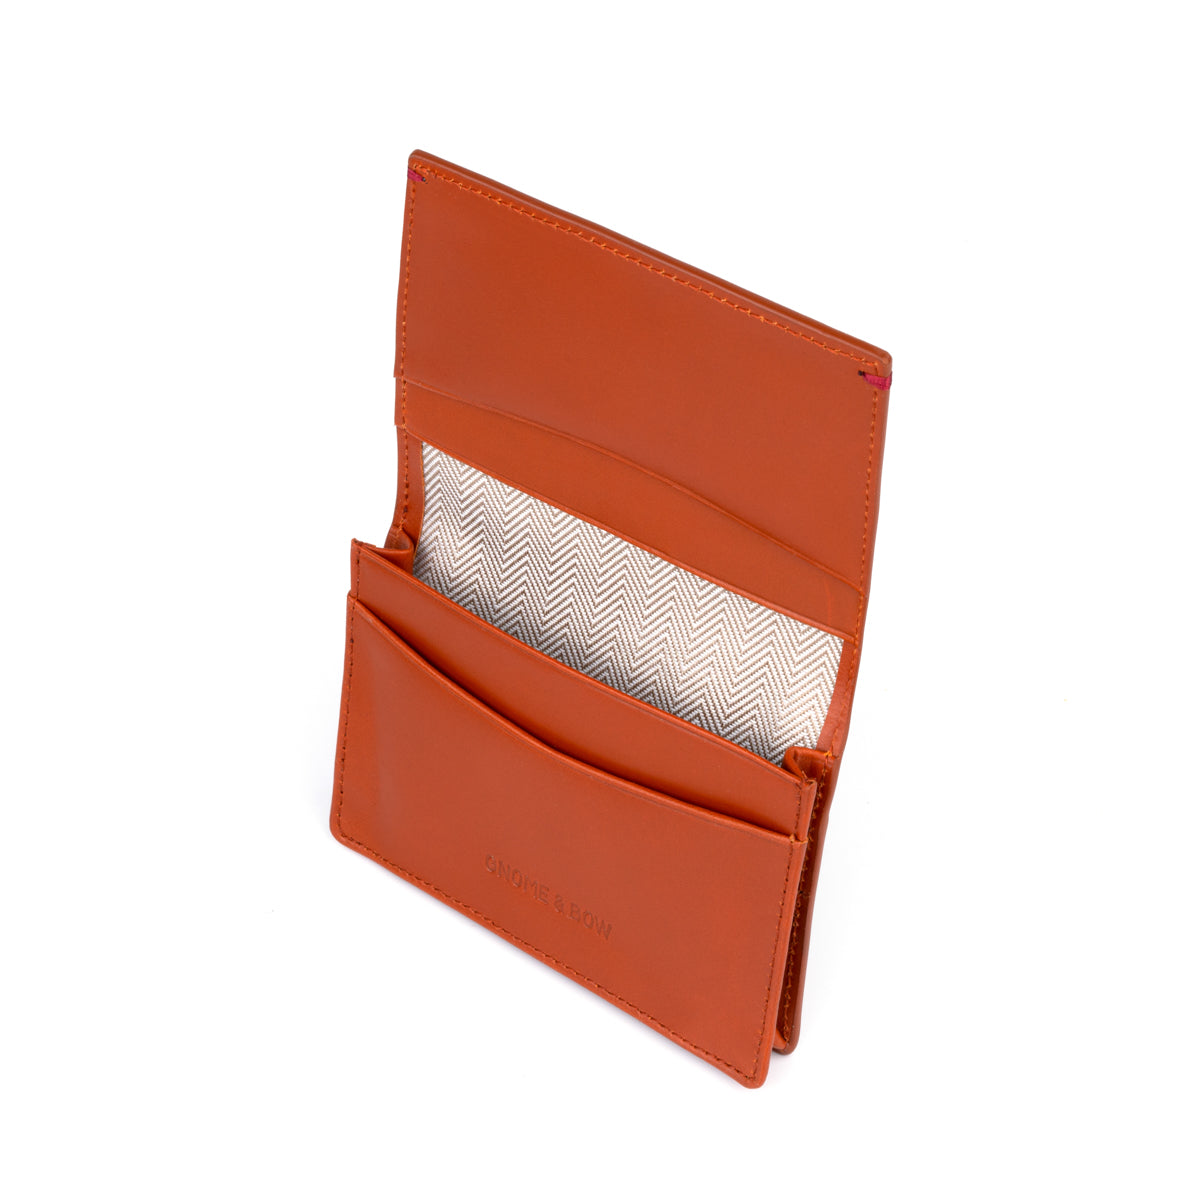 Gulliver Name Card Holder Wallet (RFID USA Wax Leather)